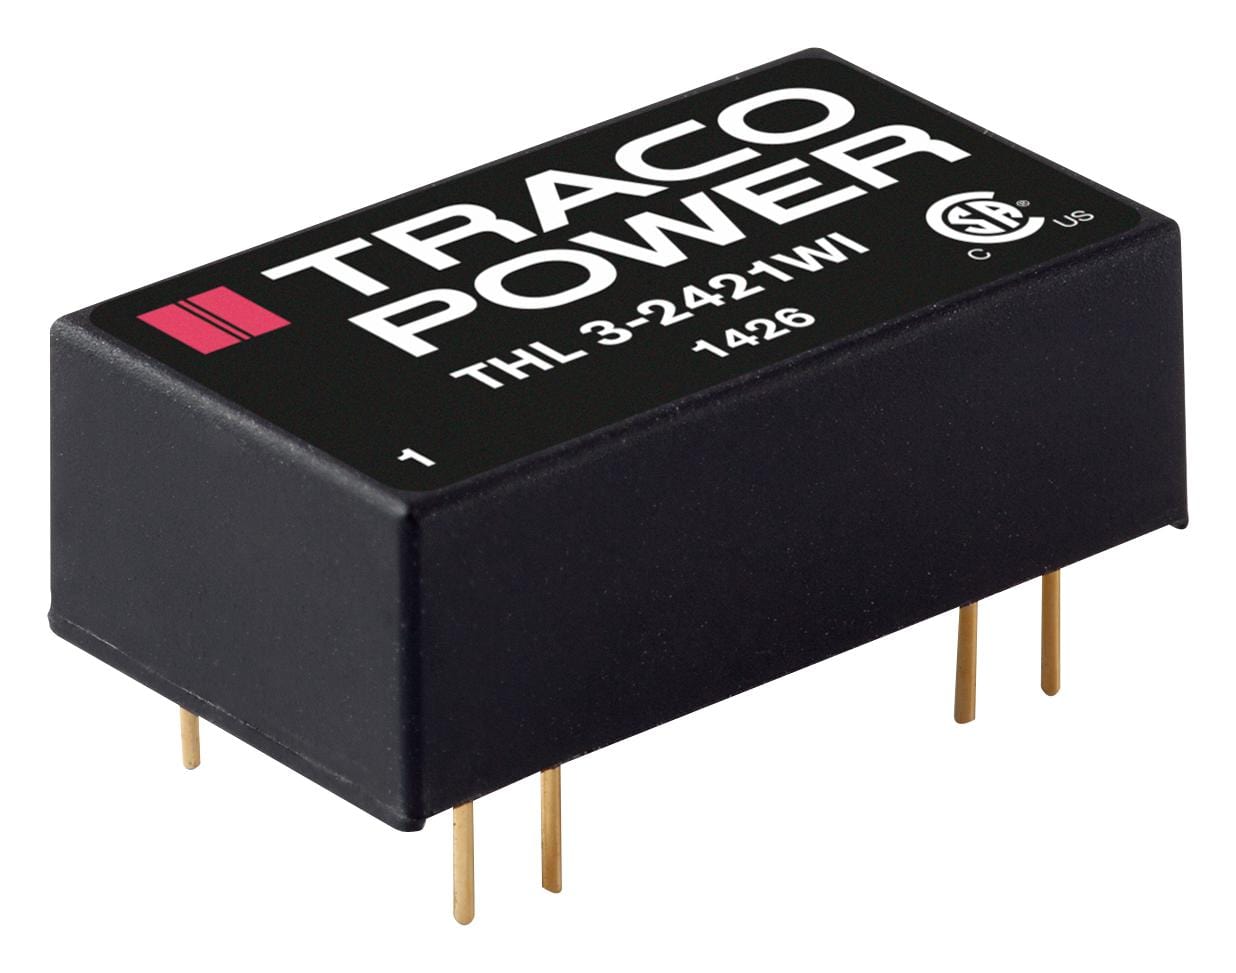 TRACO POWER Isolated Board Mount THL 3-2411WI DC-DC CONVERTER, 5V, 0.6A TRACO POWER 2813276 THL 3-2411WI